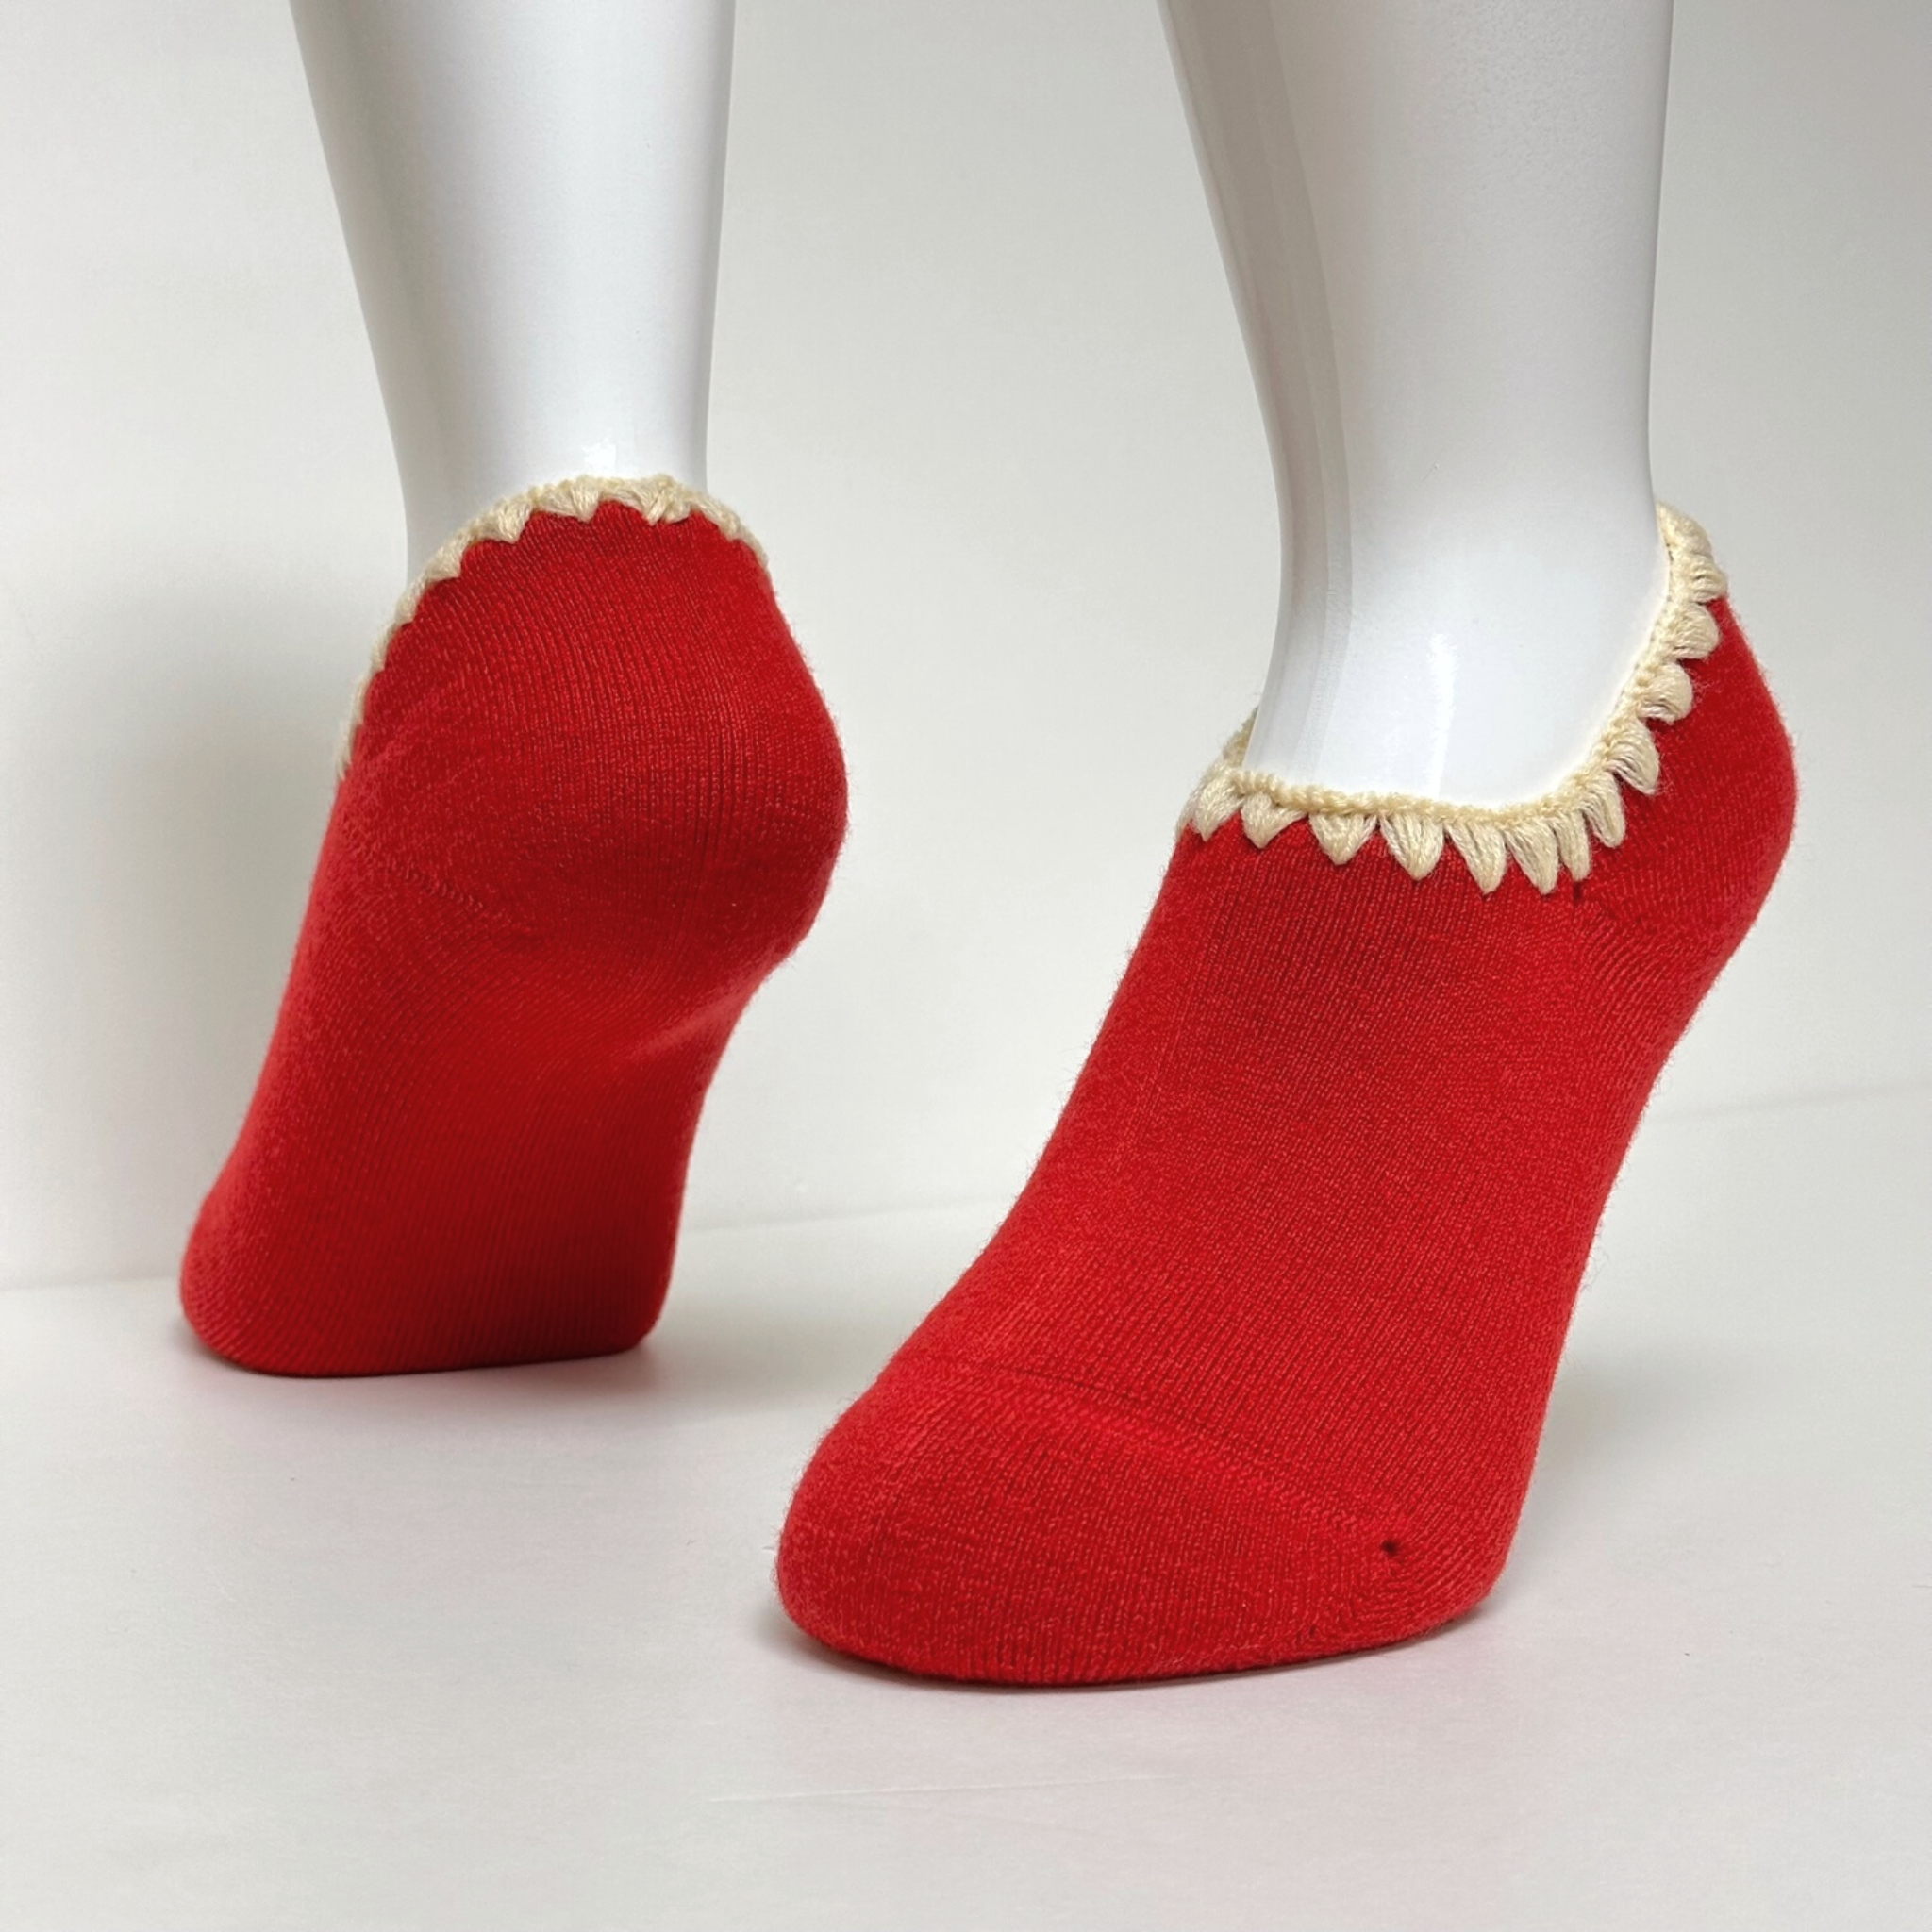 Wool Blend Slipper Socks | Classic Color with Grips or NO Grip | Red with Cream Crocheted Trim - CHERRYSTONEstyle